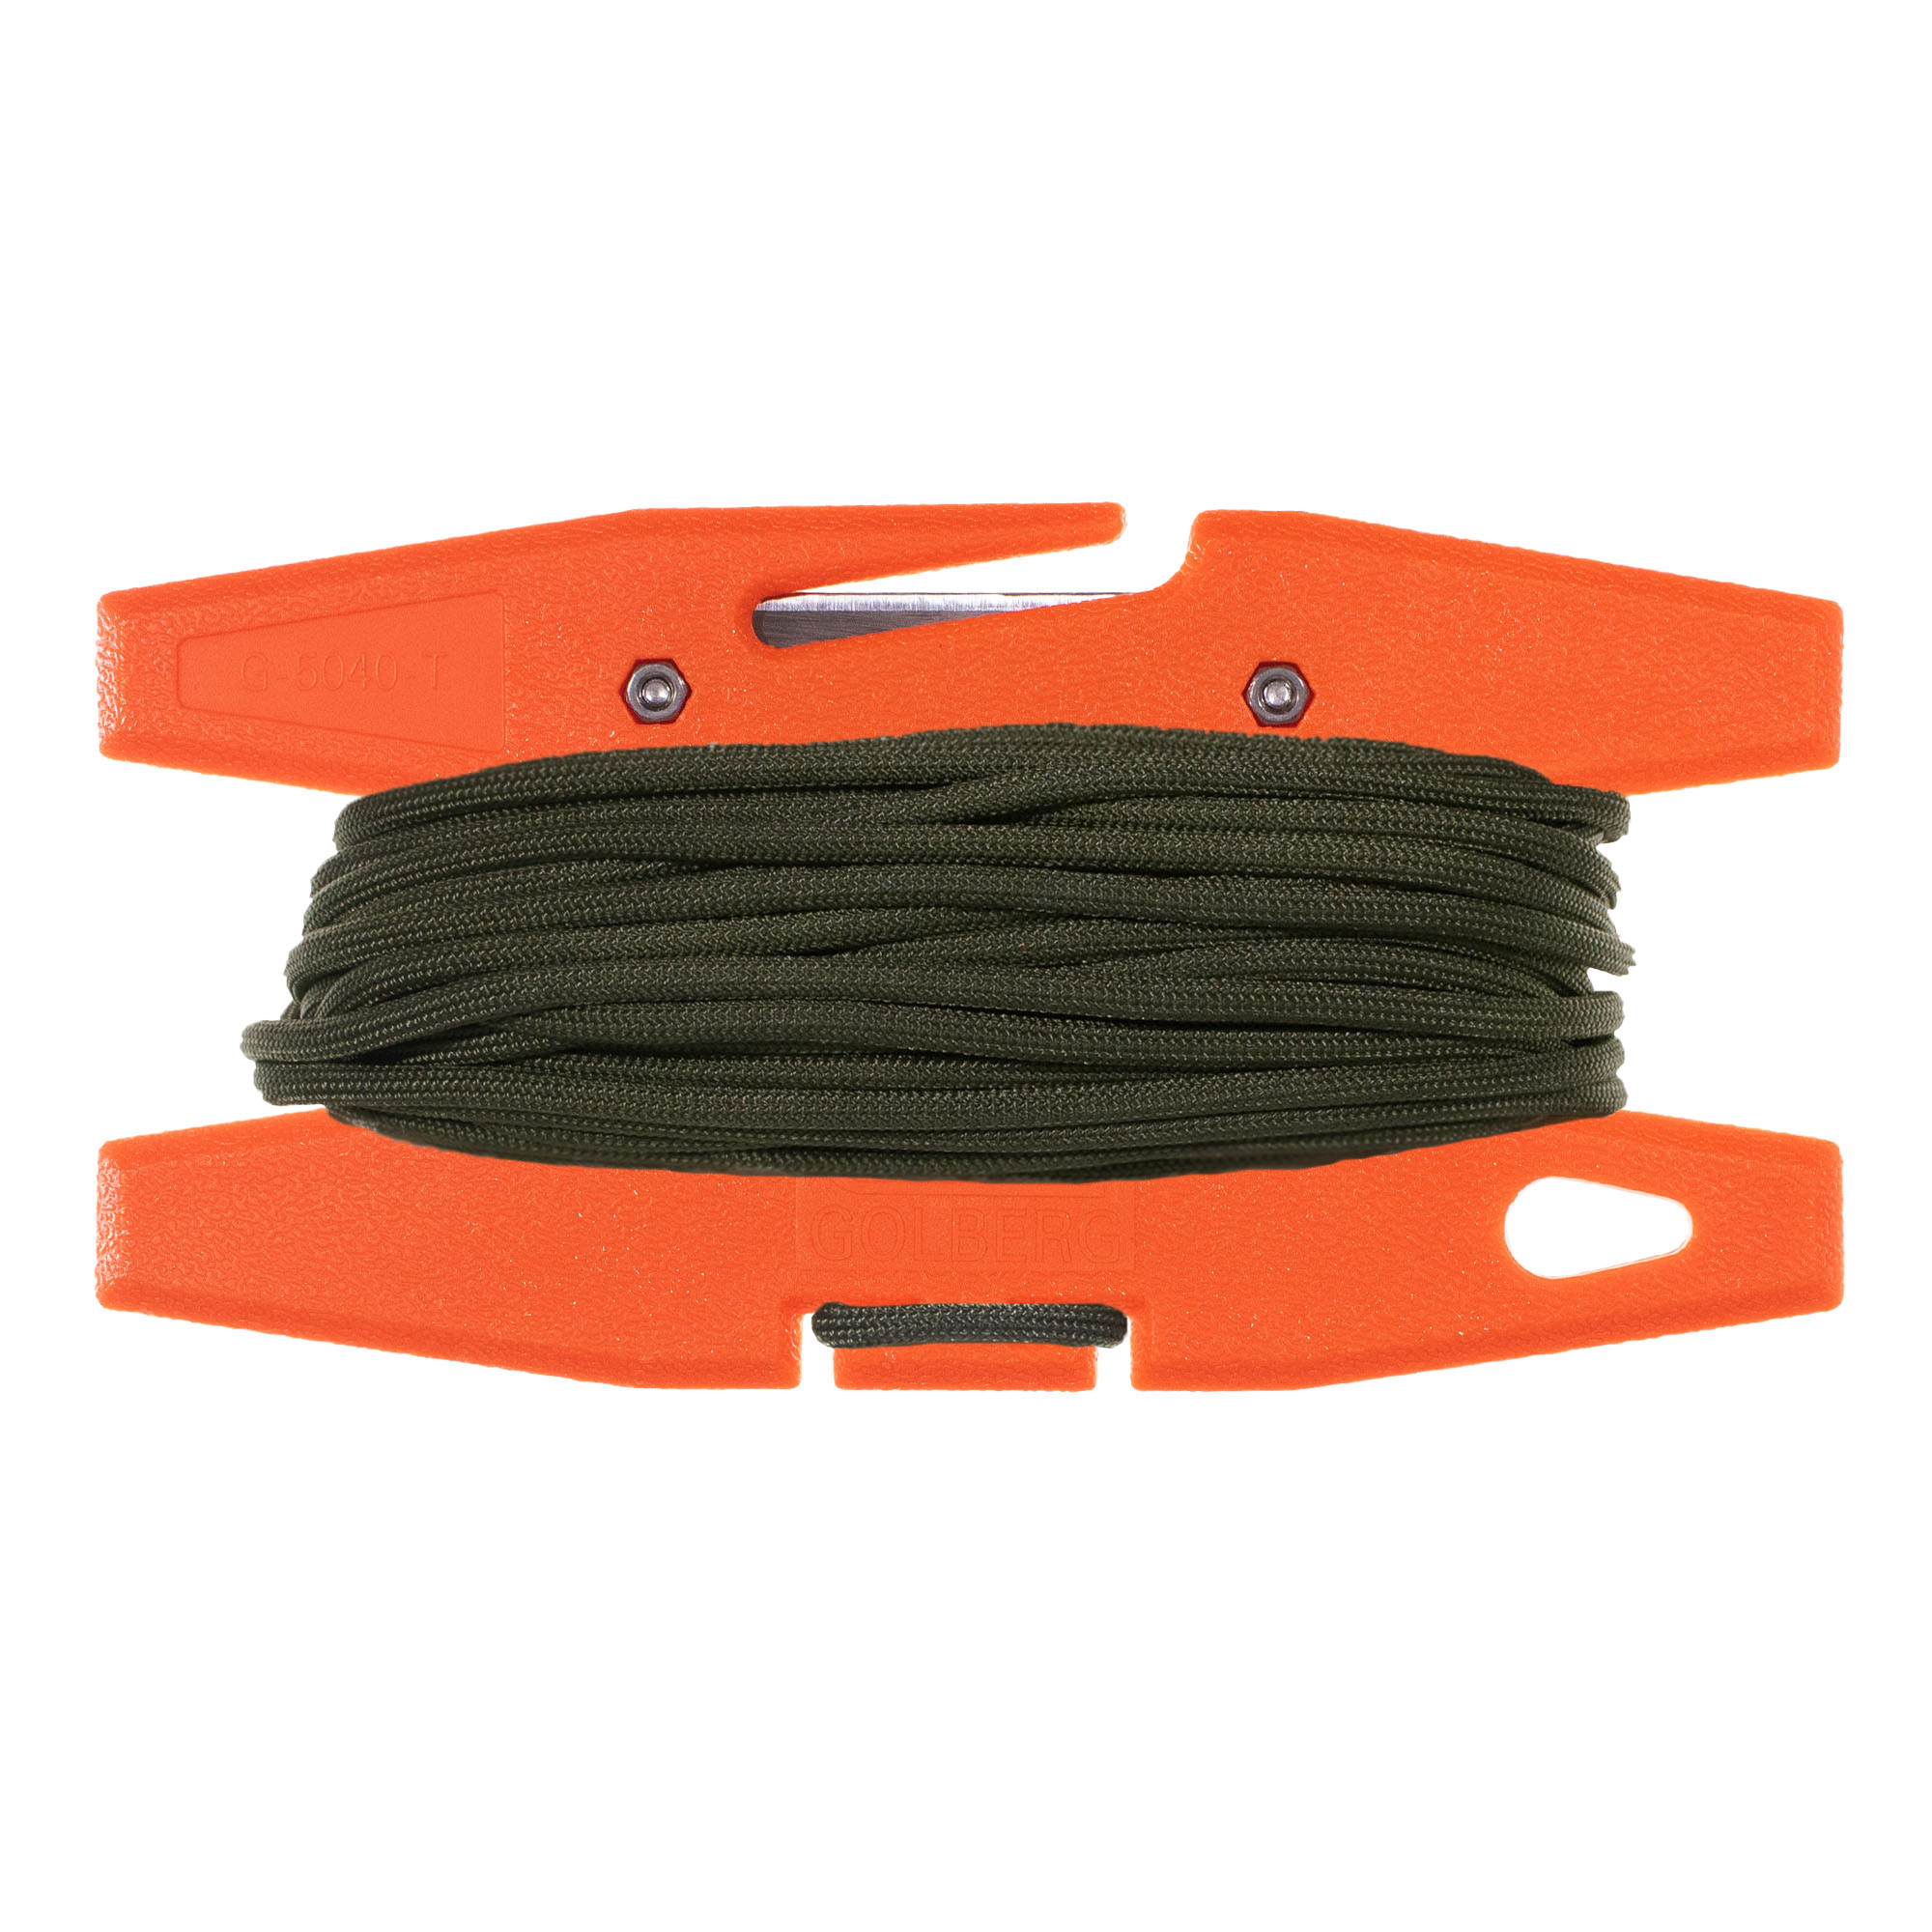 GOLBERG 550 Mil Spec Paracord with a Spool Tool Winder - Both Paracord and Tool Available in a Variety of Colors - Paracord 50 Feet - image 1 of 3